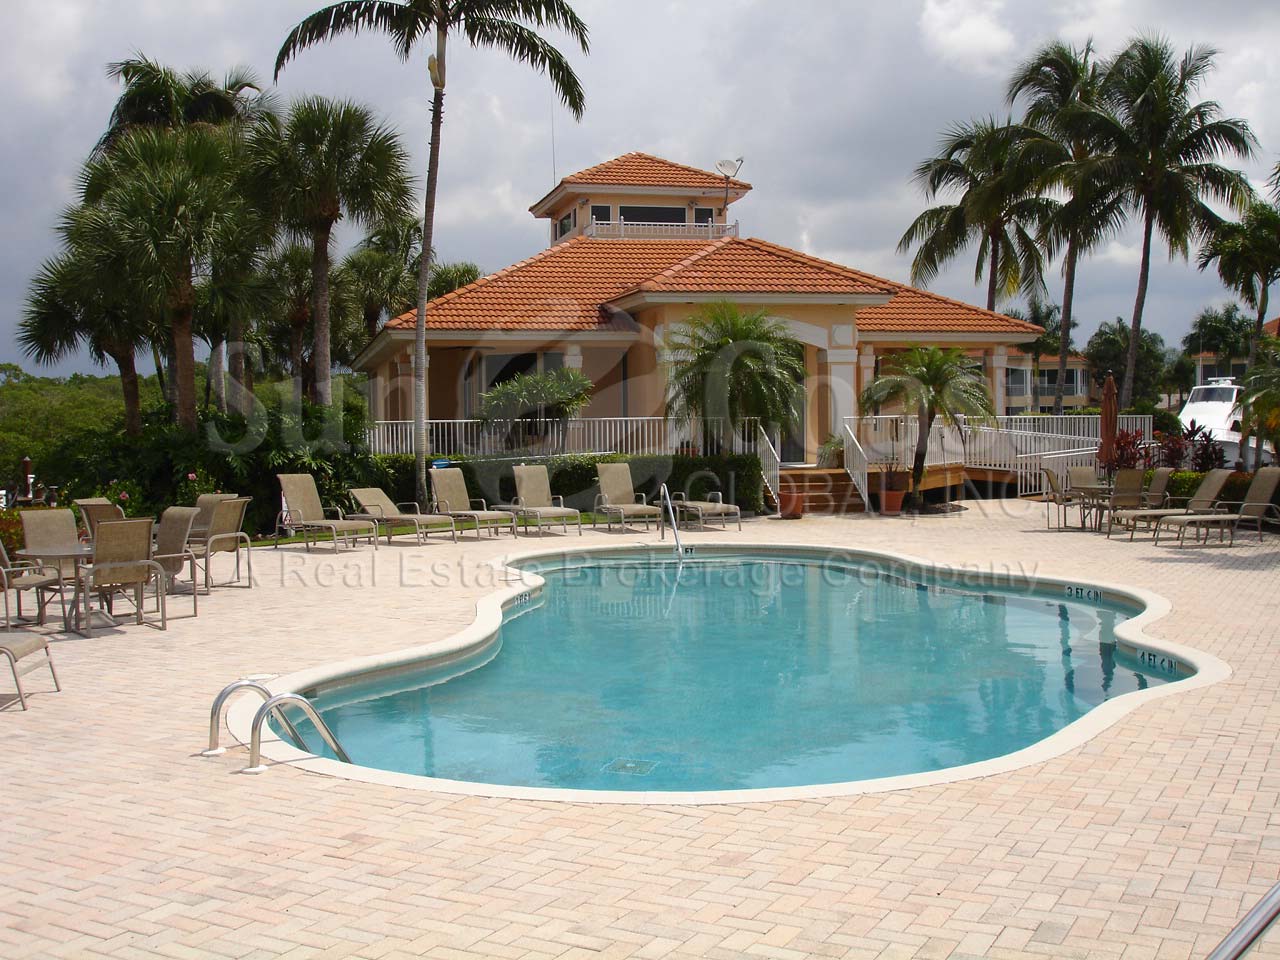 WINDSTAR Southpointe Yacht Club pool and clubhouse